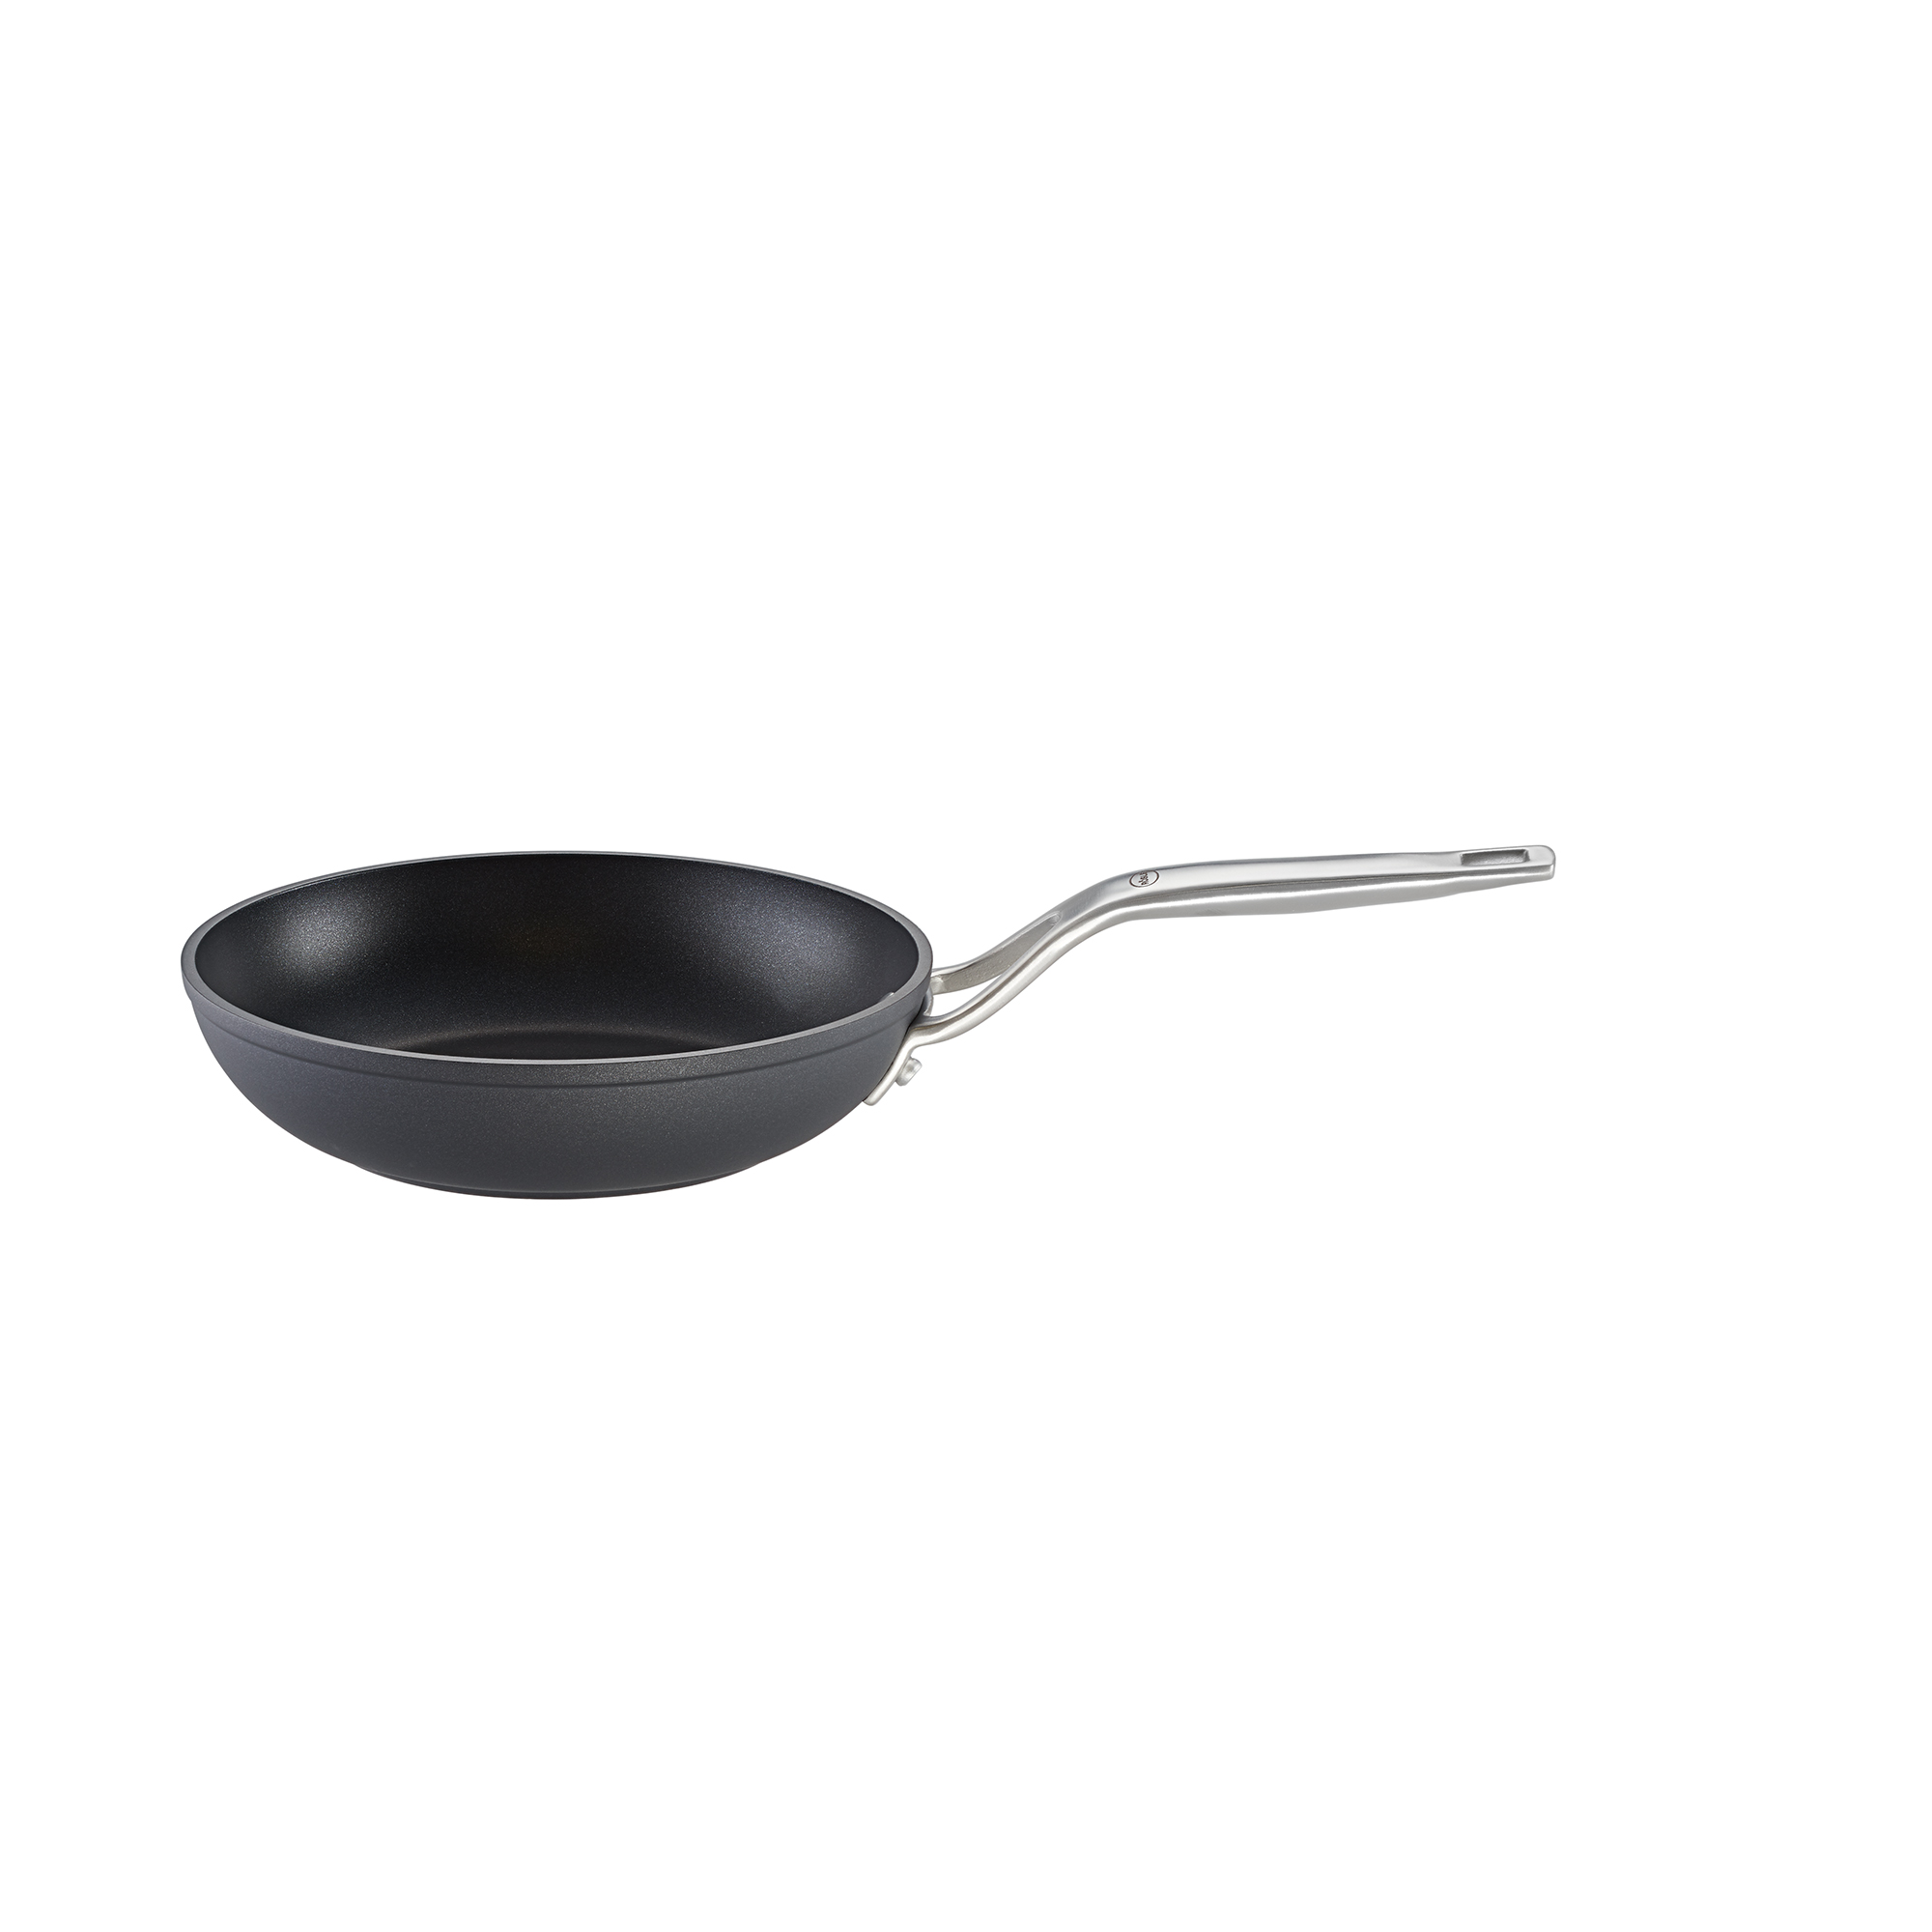 Frying Pan "Raise" Ø 20 cm | 7.9 in. from forged aluminum with non-stick coating ProPlex®